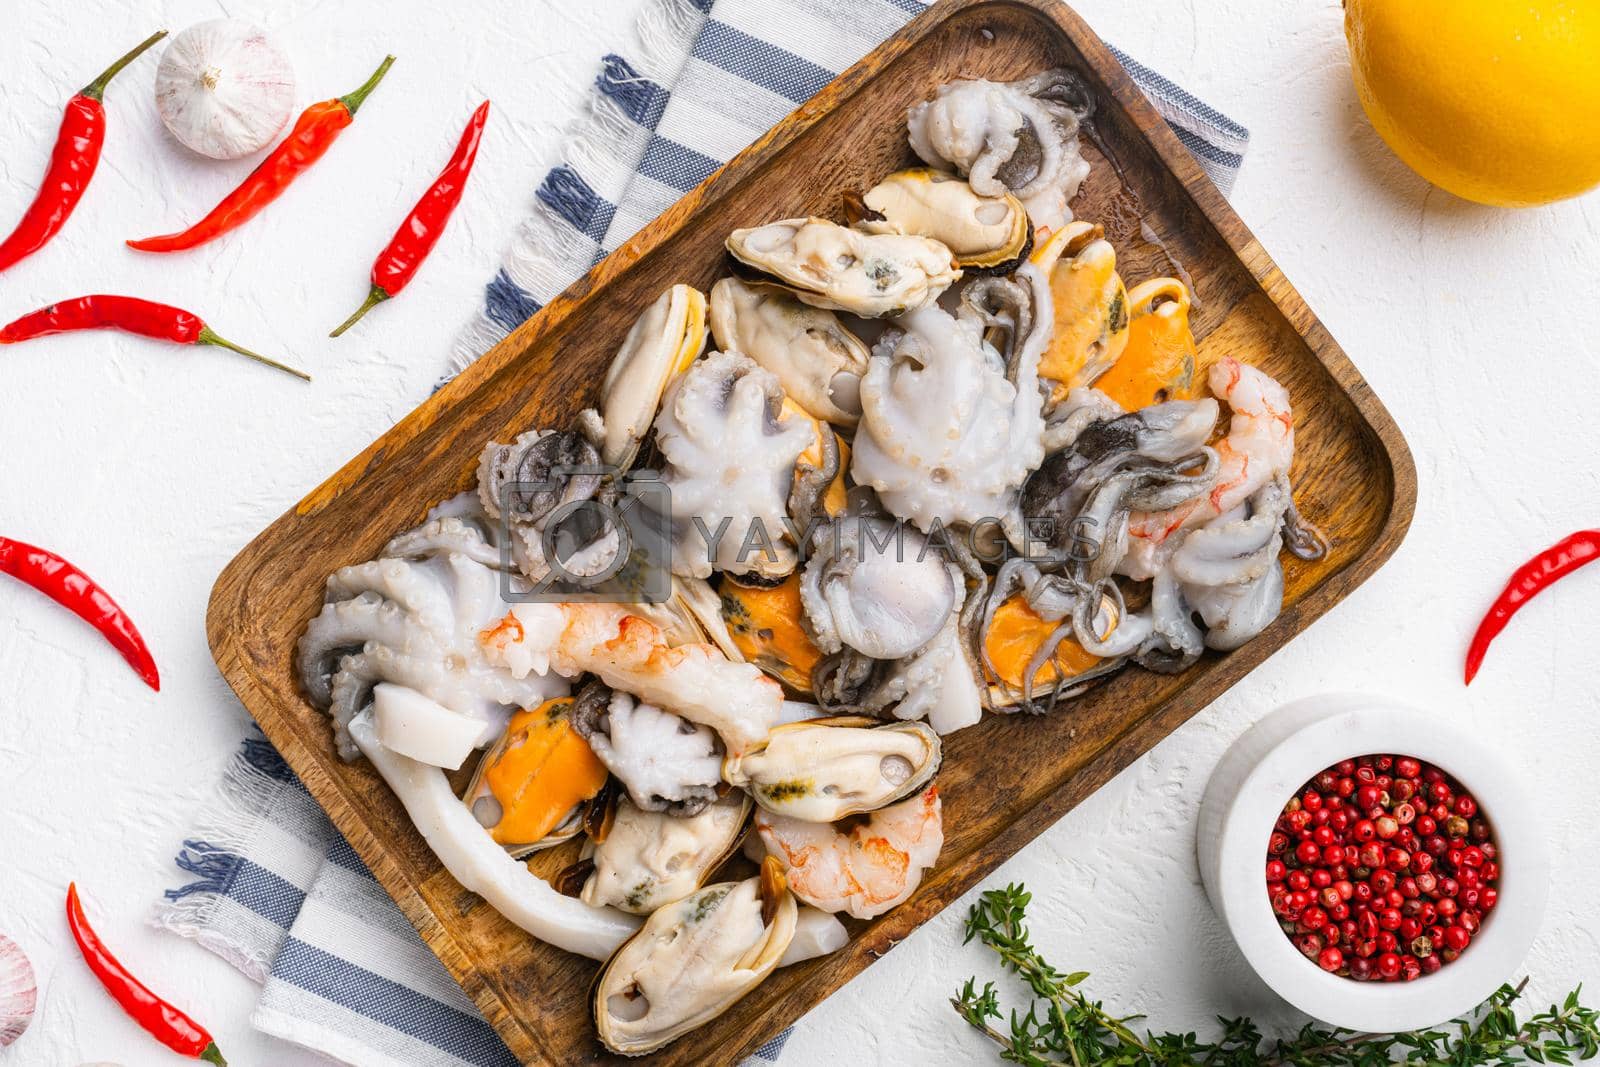 Royalty free image of Seafood board with shrimp, squid mussel and octopus, on white stone table background, top view flat lay by Ilianesolenyi